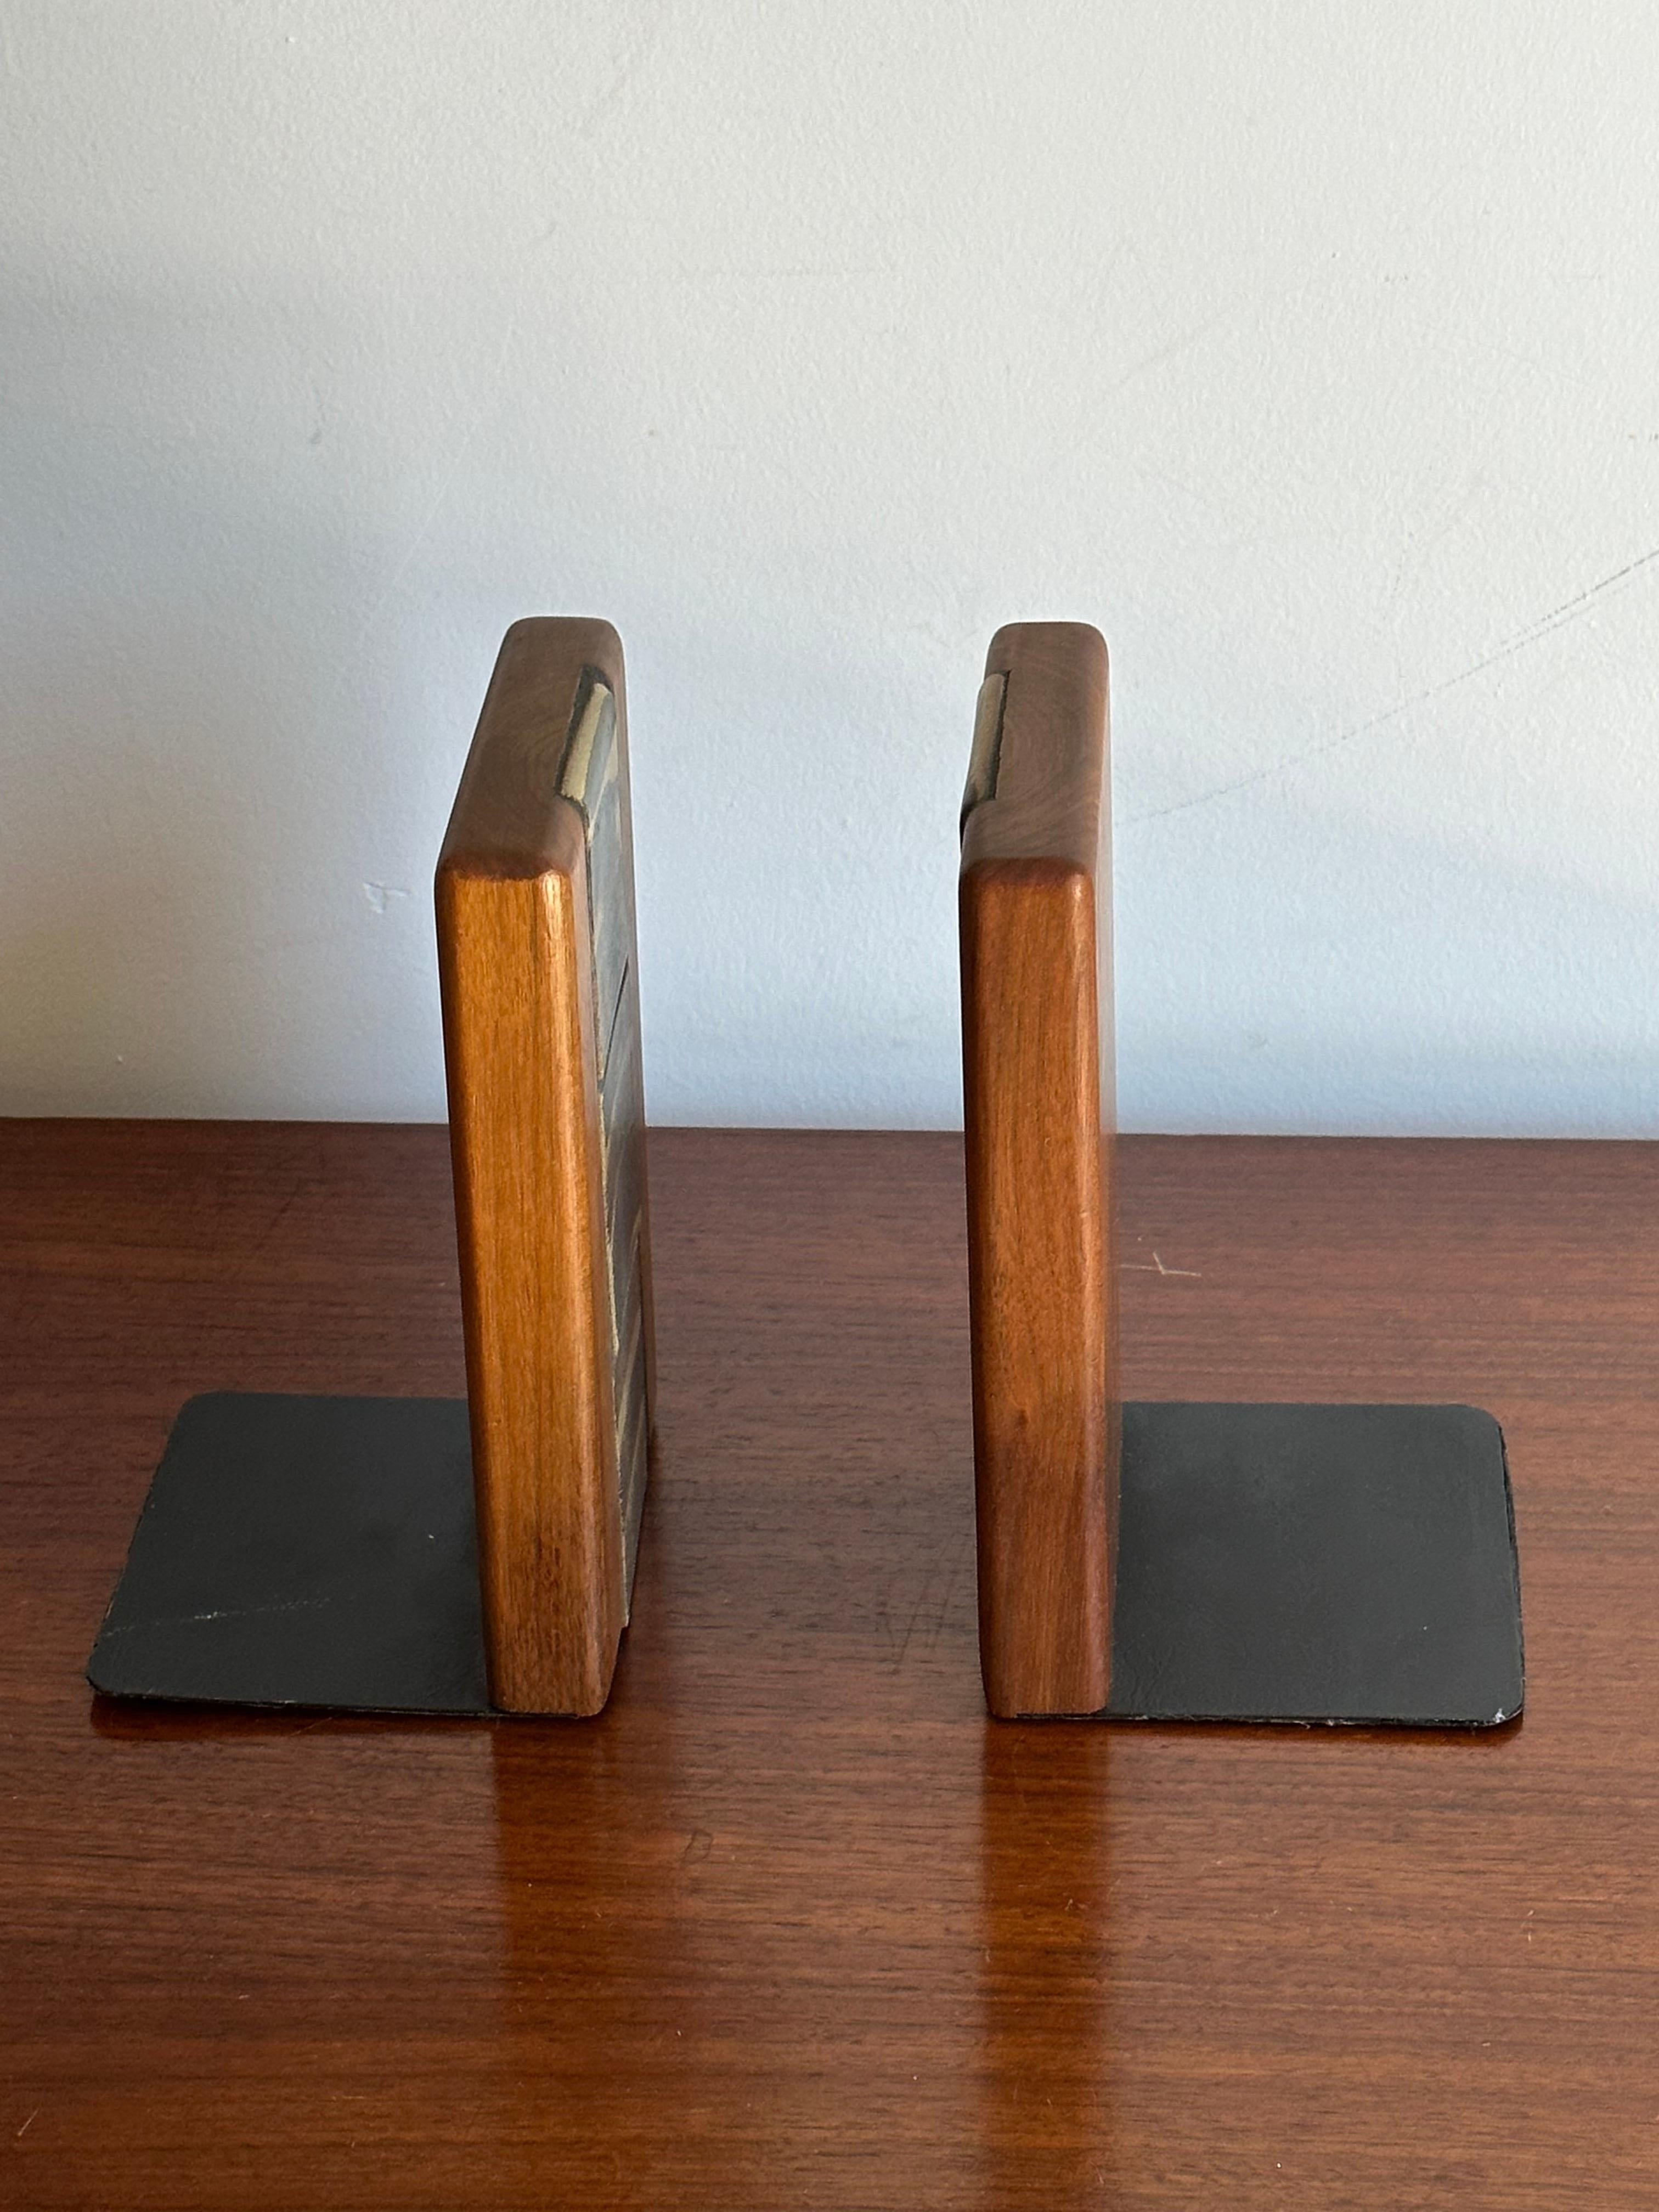 Jane and Gordon Martz Bookends for Marshall Studios 1